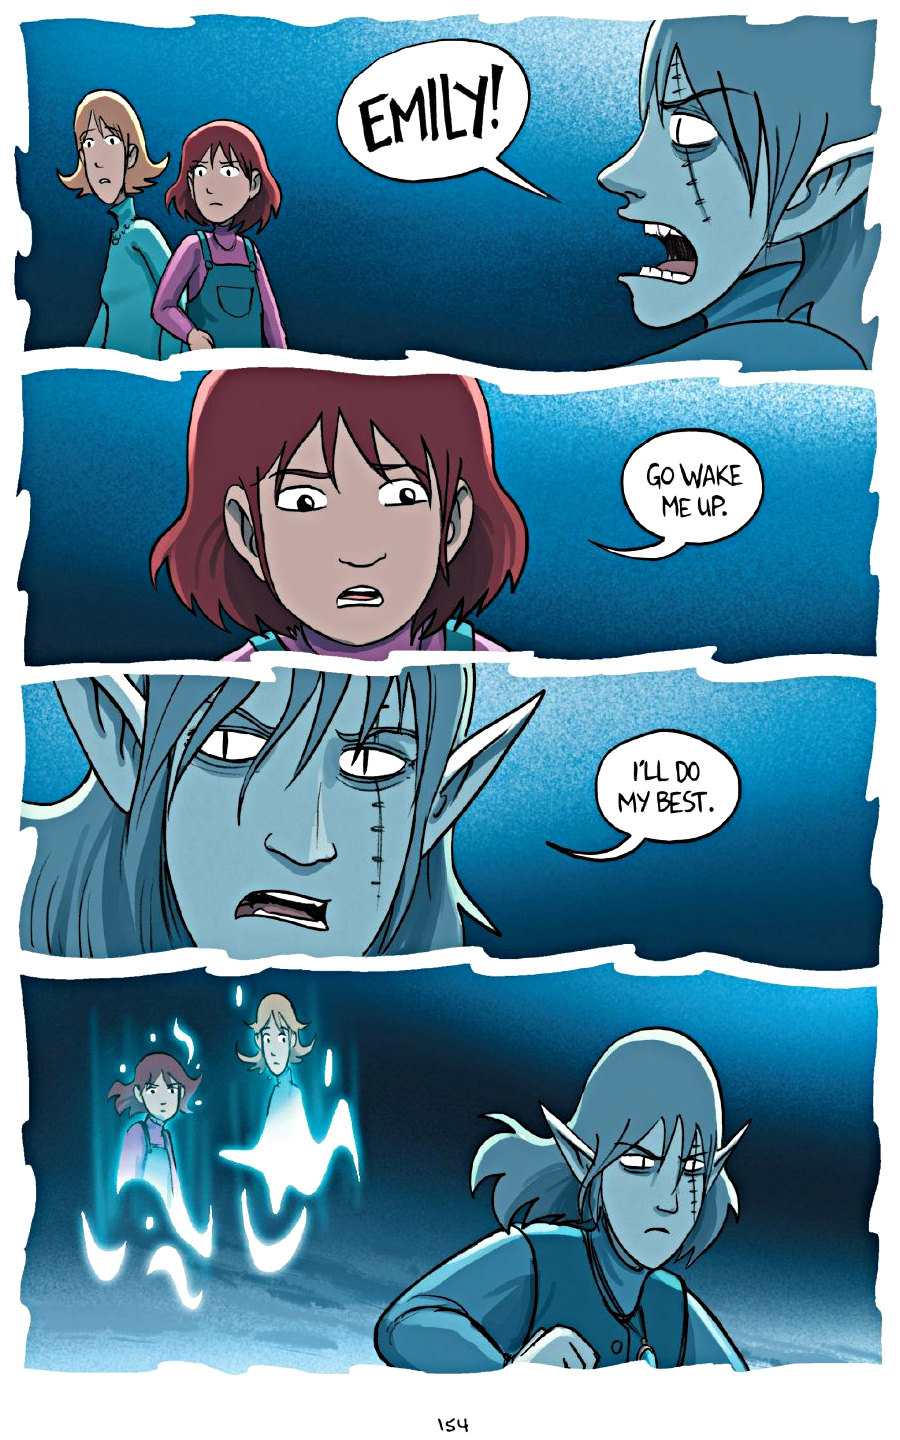 page 154 of amulet 7 firelight graphic novel